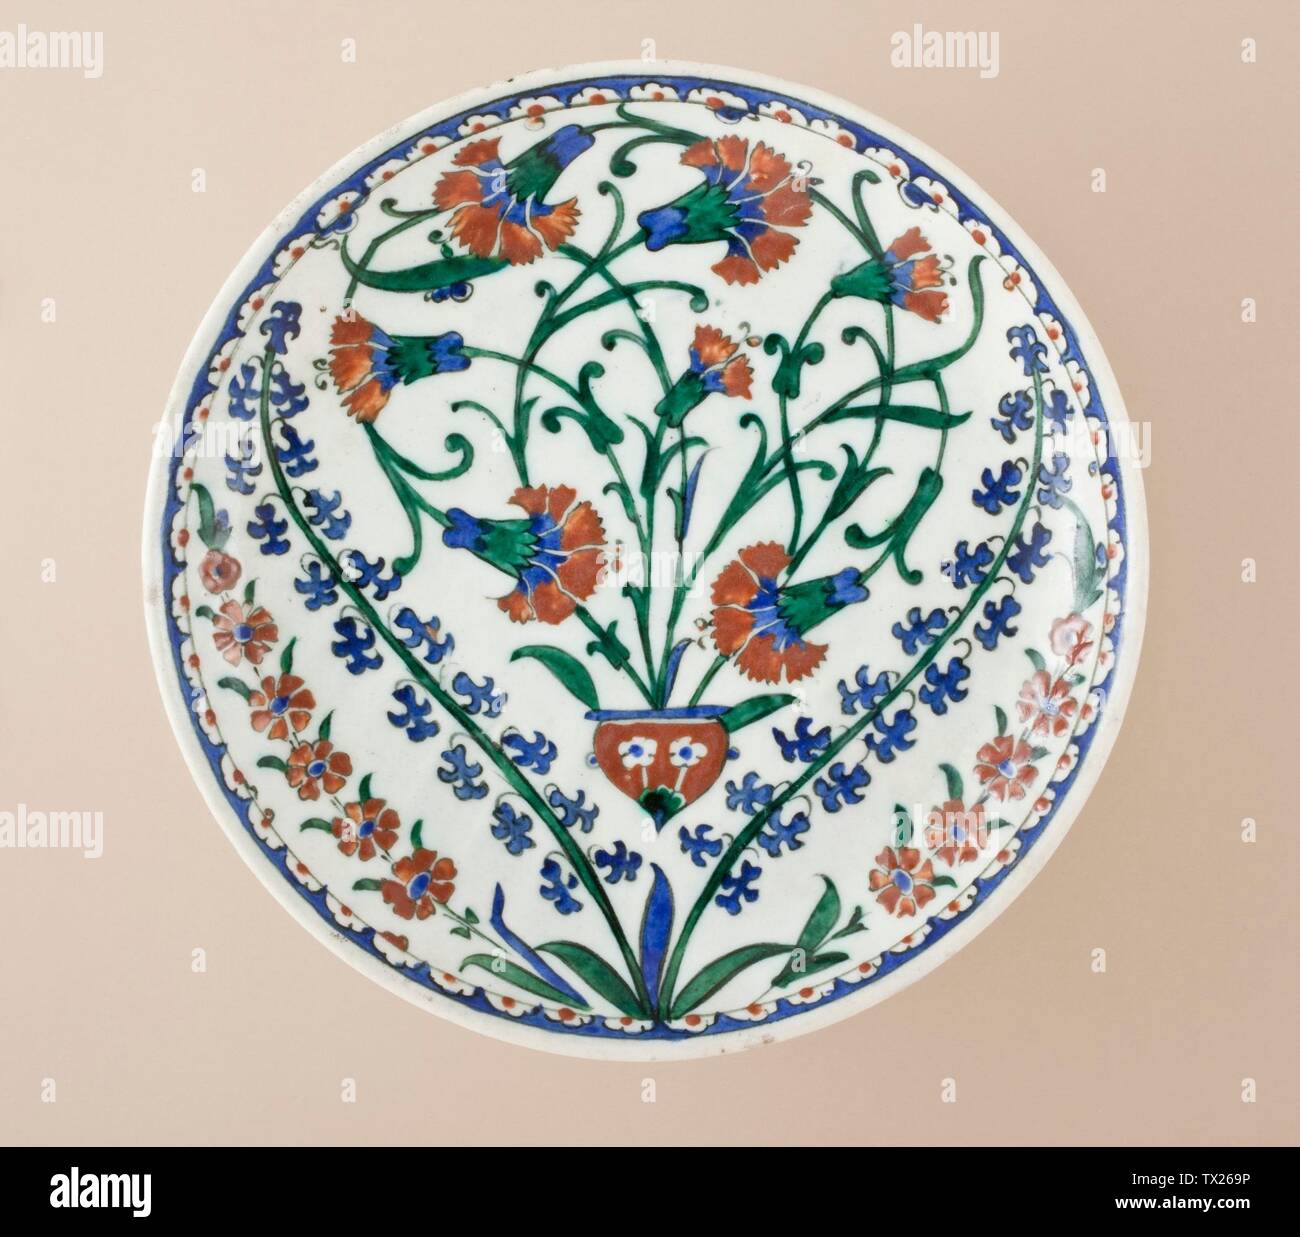 Dish;  Turkey, Iznik, 1560-1585 Furnishings; Serviceware Fritware, underglaze-painted Height:  1 15/16 in. (5 cm); Diameter:  11 in. (28 cm) Purchased with funds provided by Camilla Chandler Frost (M.2006.130) Islamic Art; between 1560 and 1585 date QS:P571,+1550-00-00T00:00:00Z/7,P1319,+1560-00-00T00:00:00Z/9,P1326,+1585-00-00T00:00:00Z/9; Stock Photo